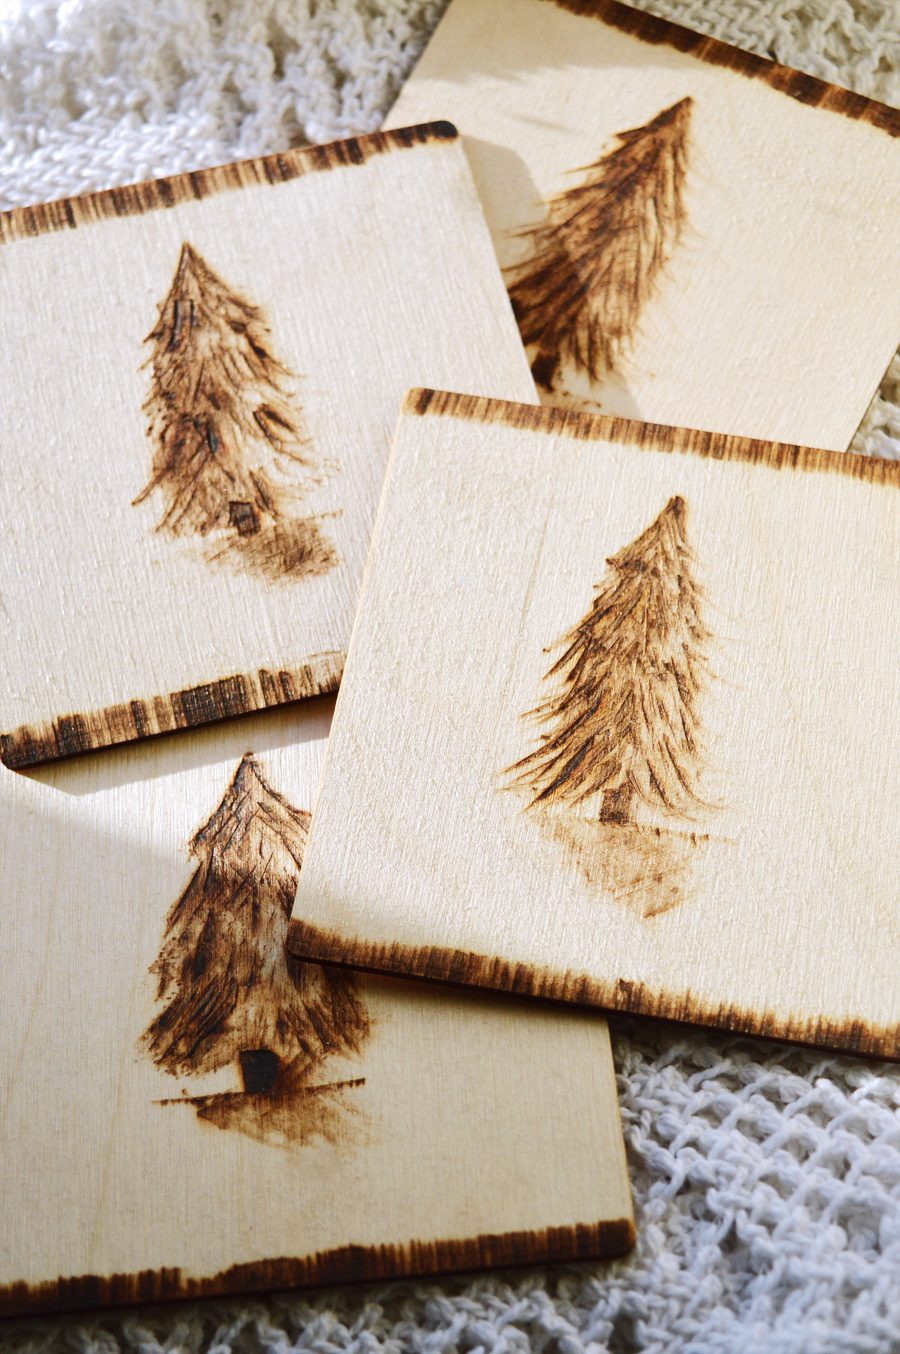 DIY woodburned coasters, perfect beginner's project! #pyrography